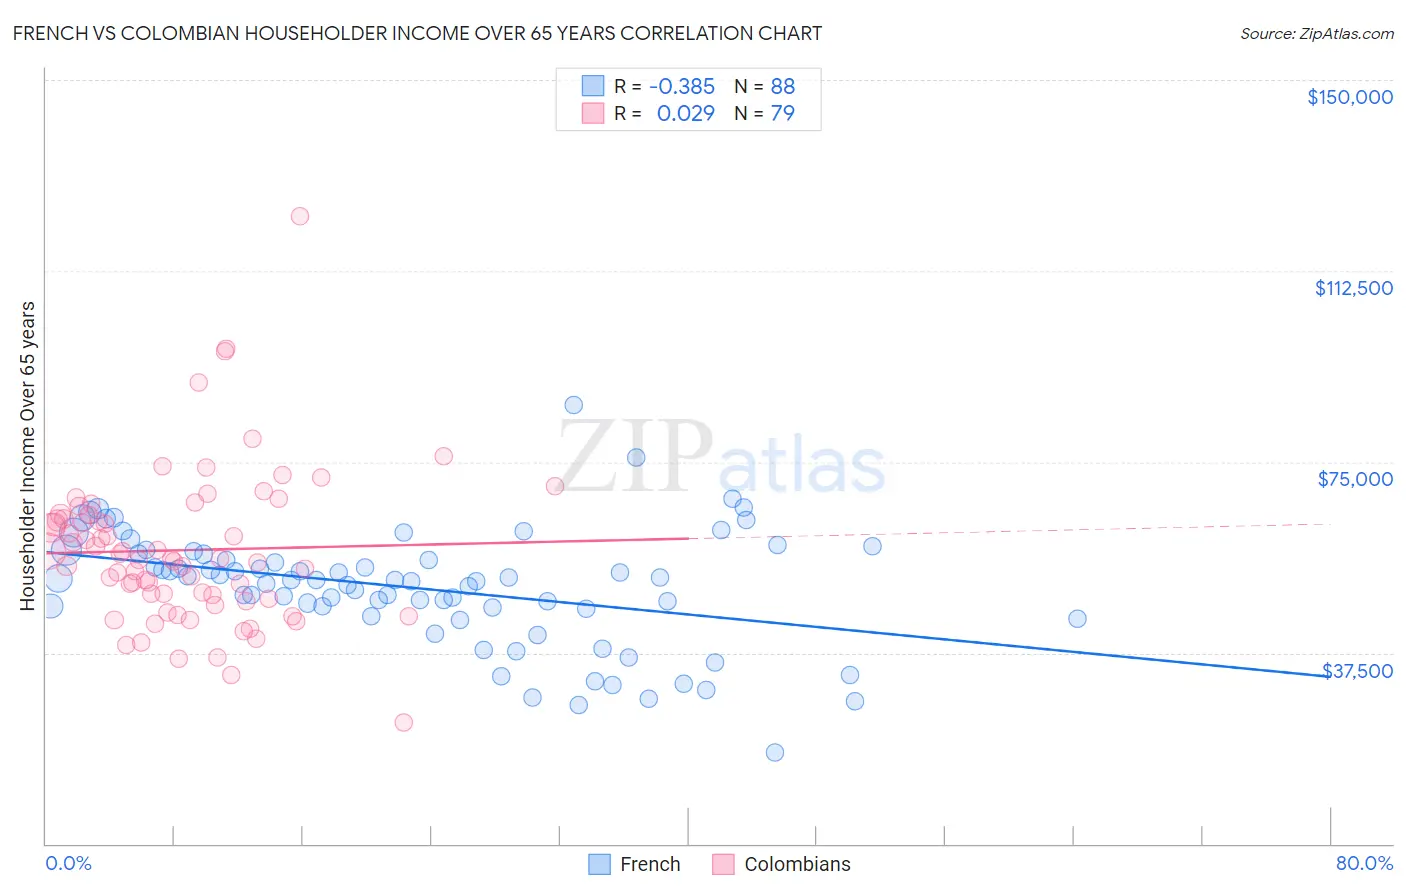 French vs Colombian Householder Income Over 65 years